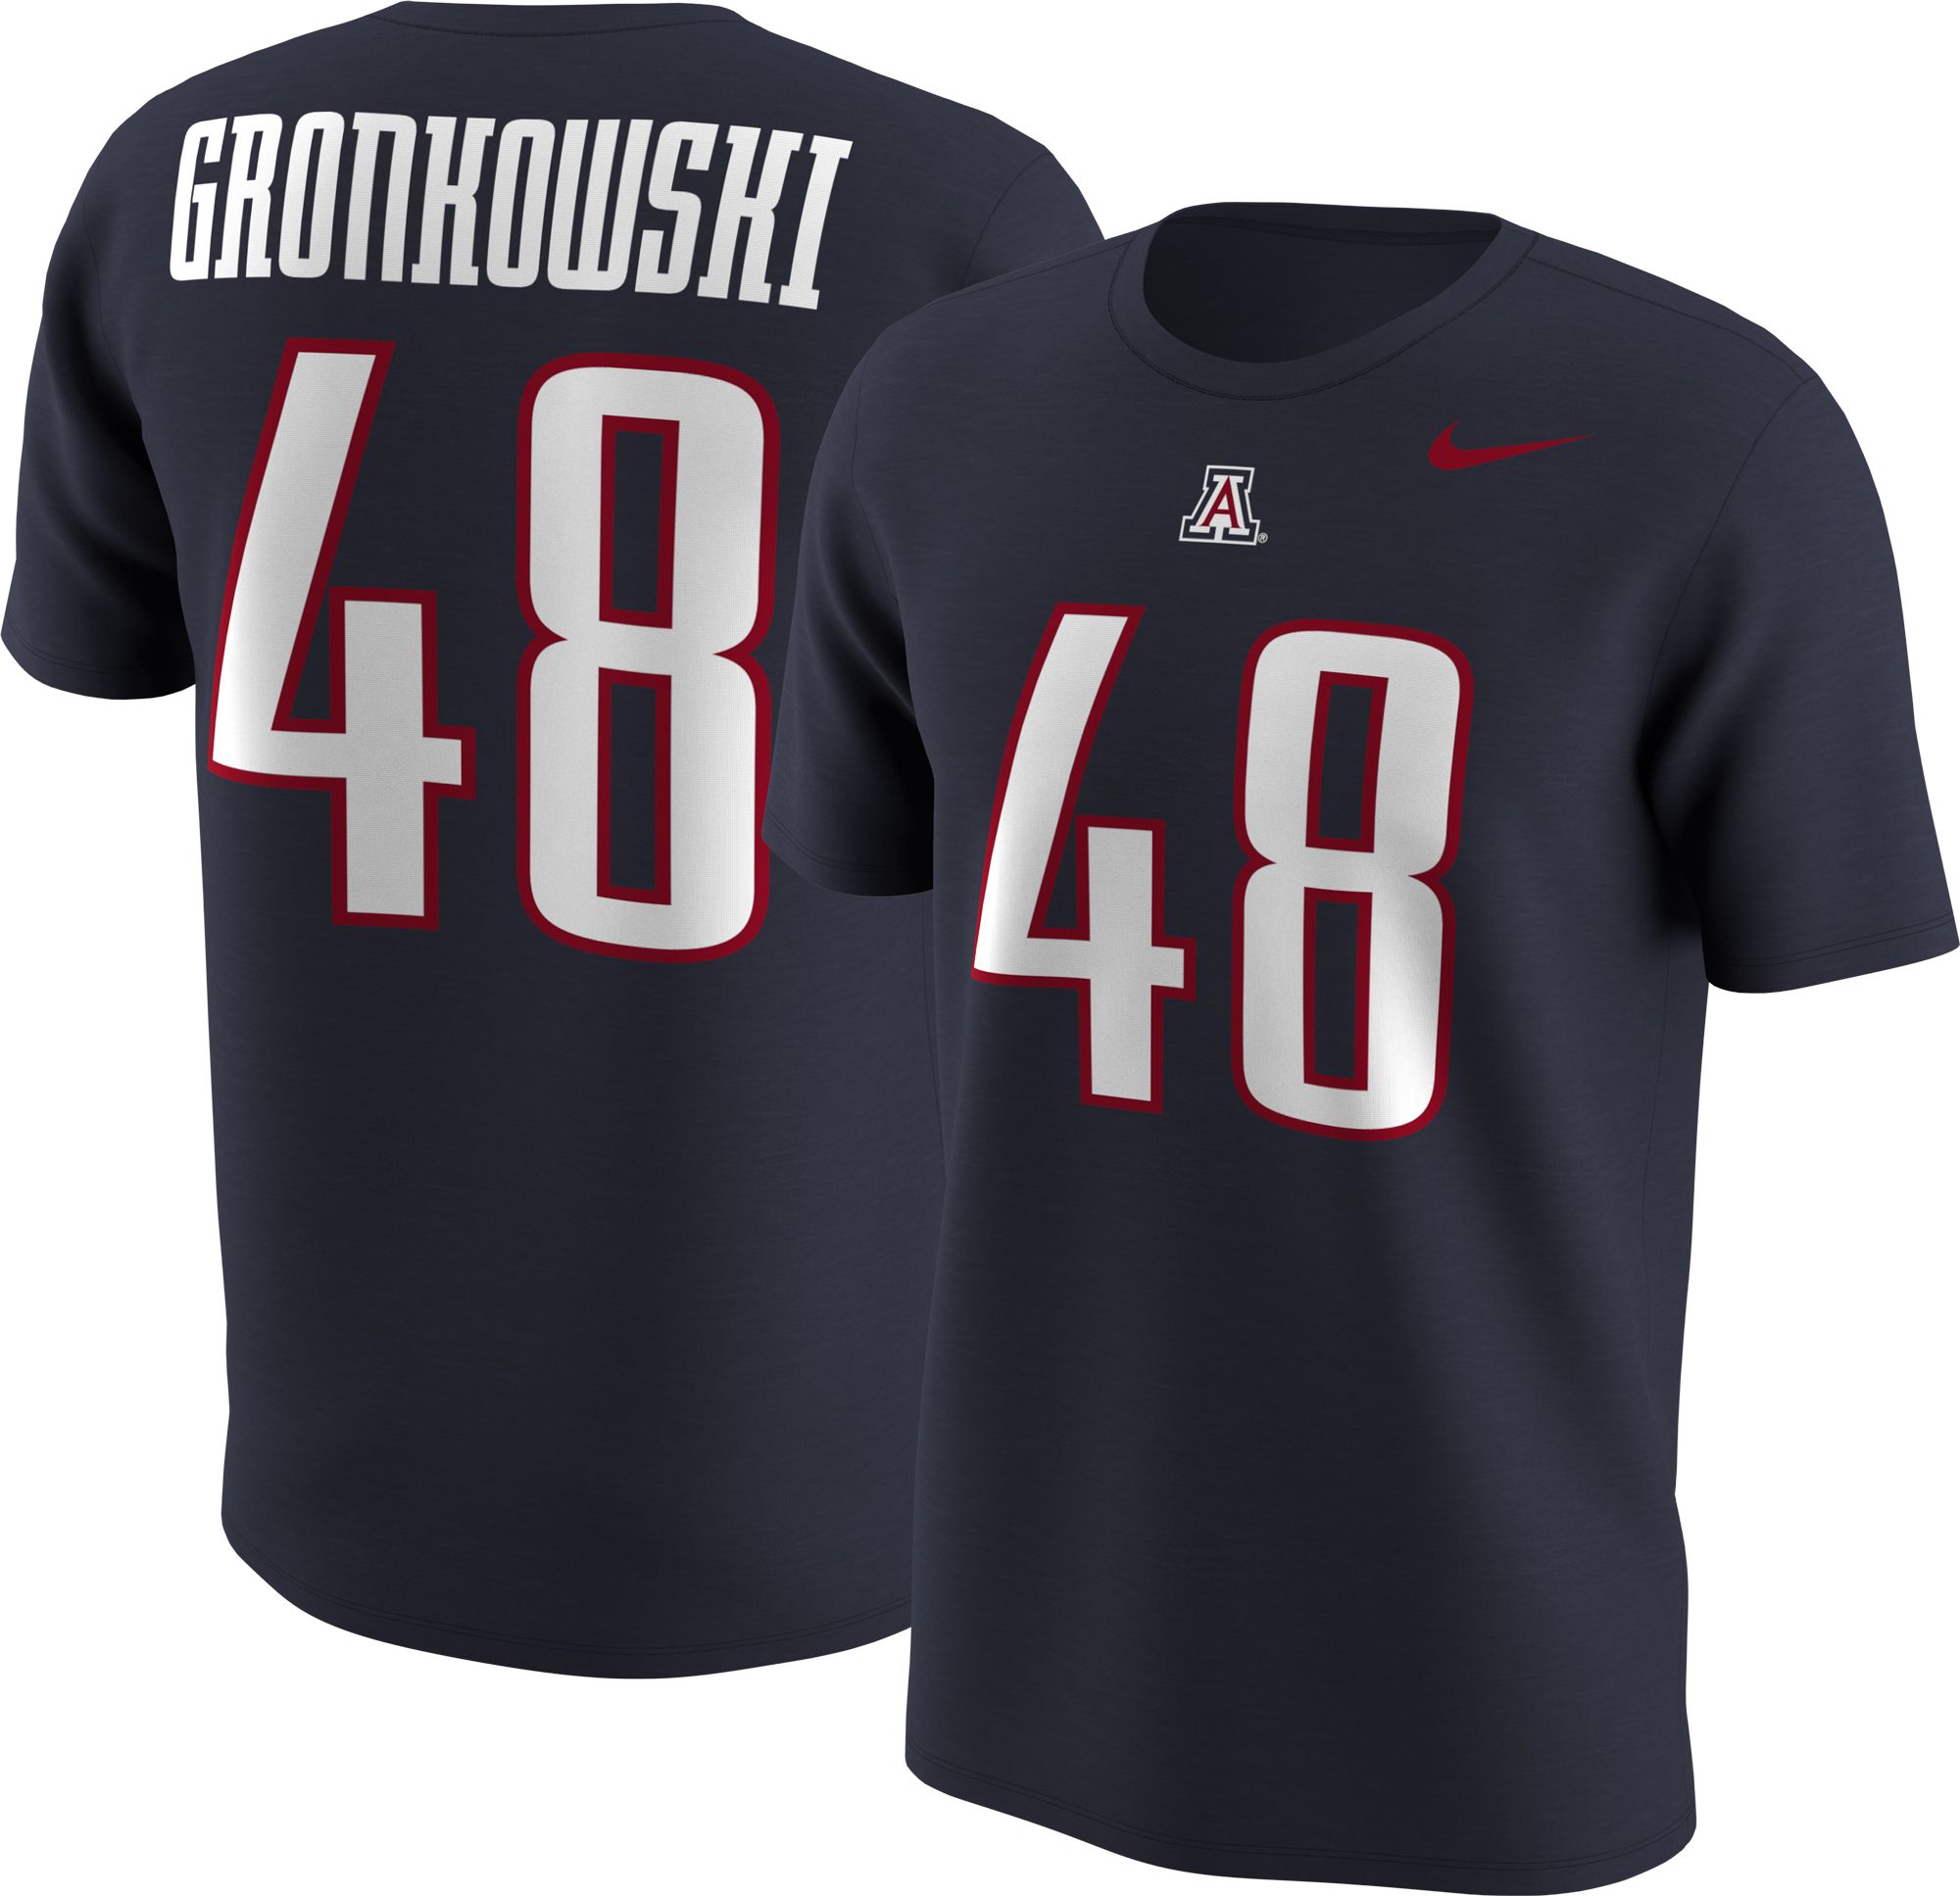 gronk jersey